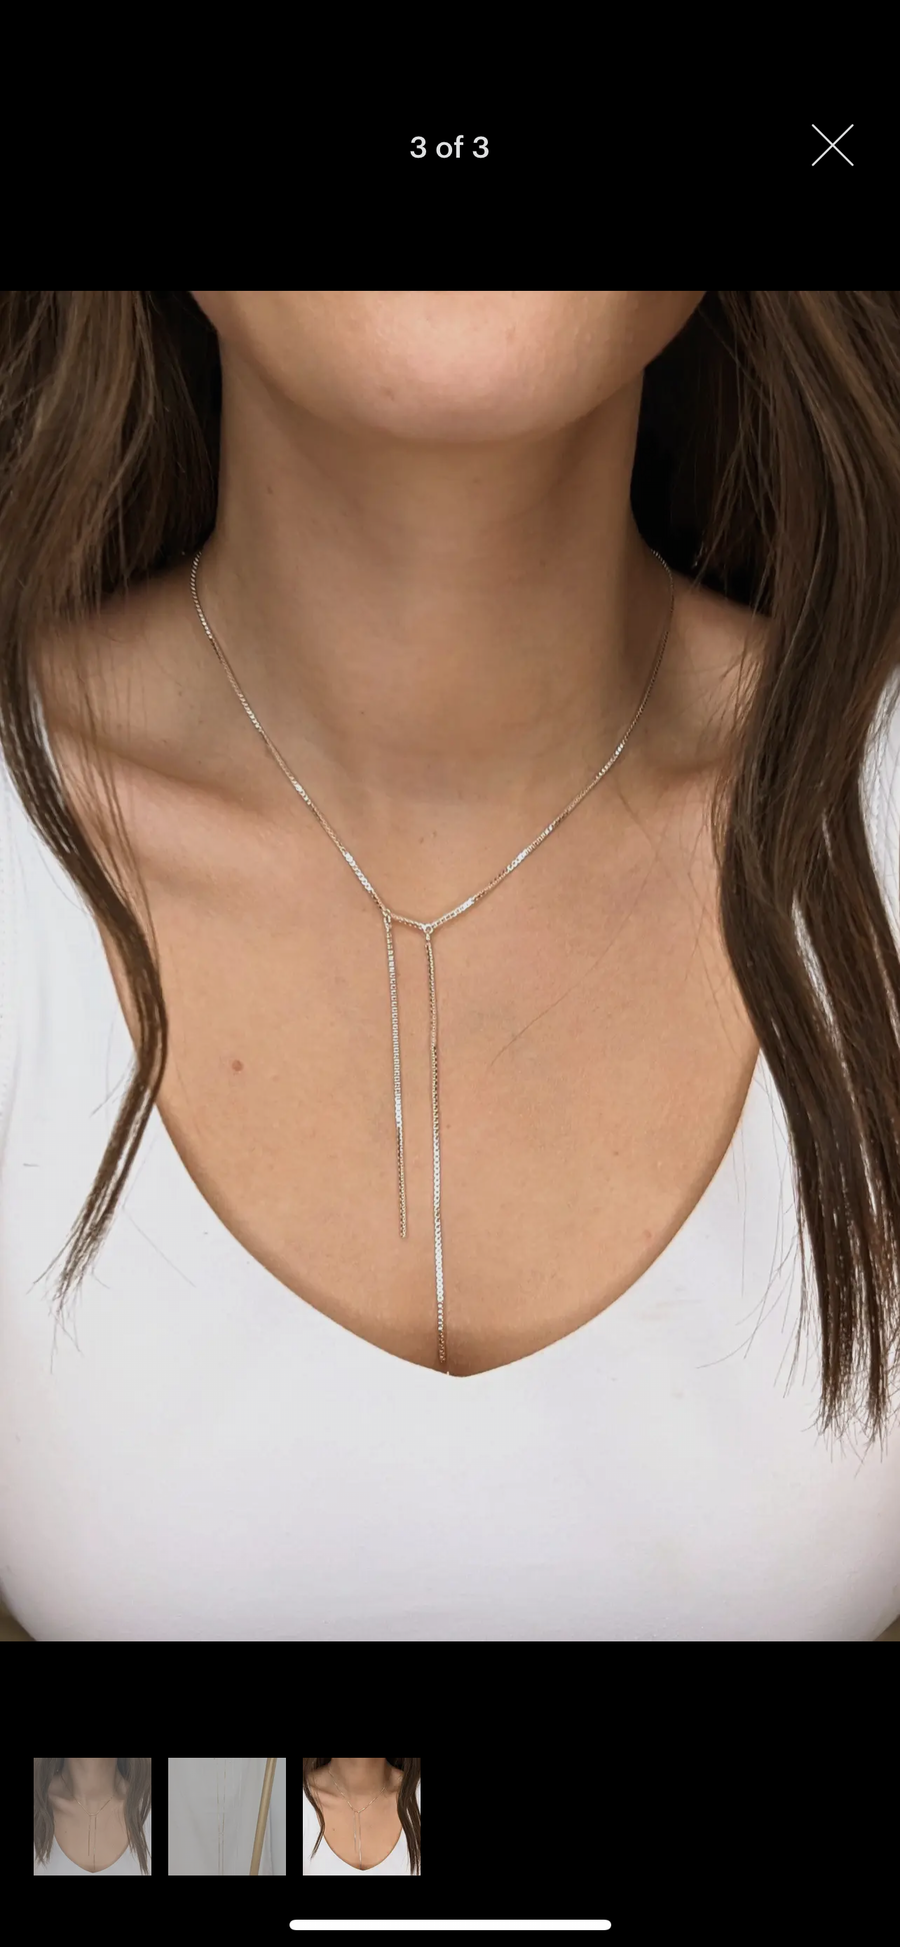 Catherine Dainty Lariat Chain Necklace